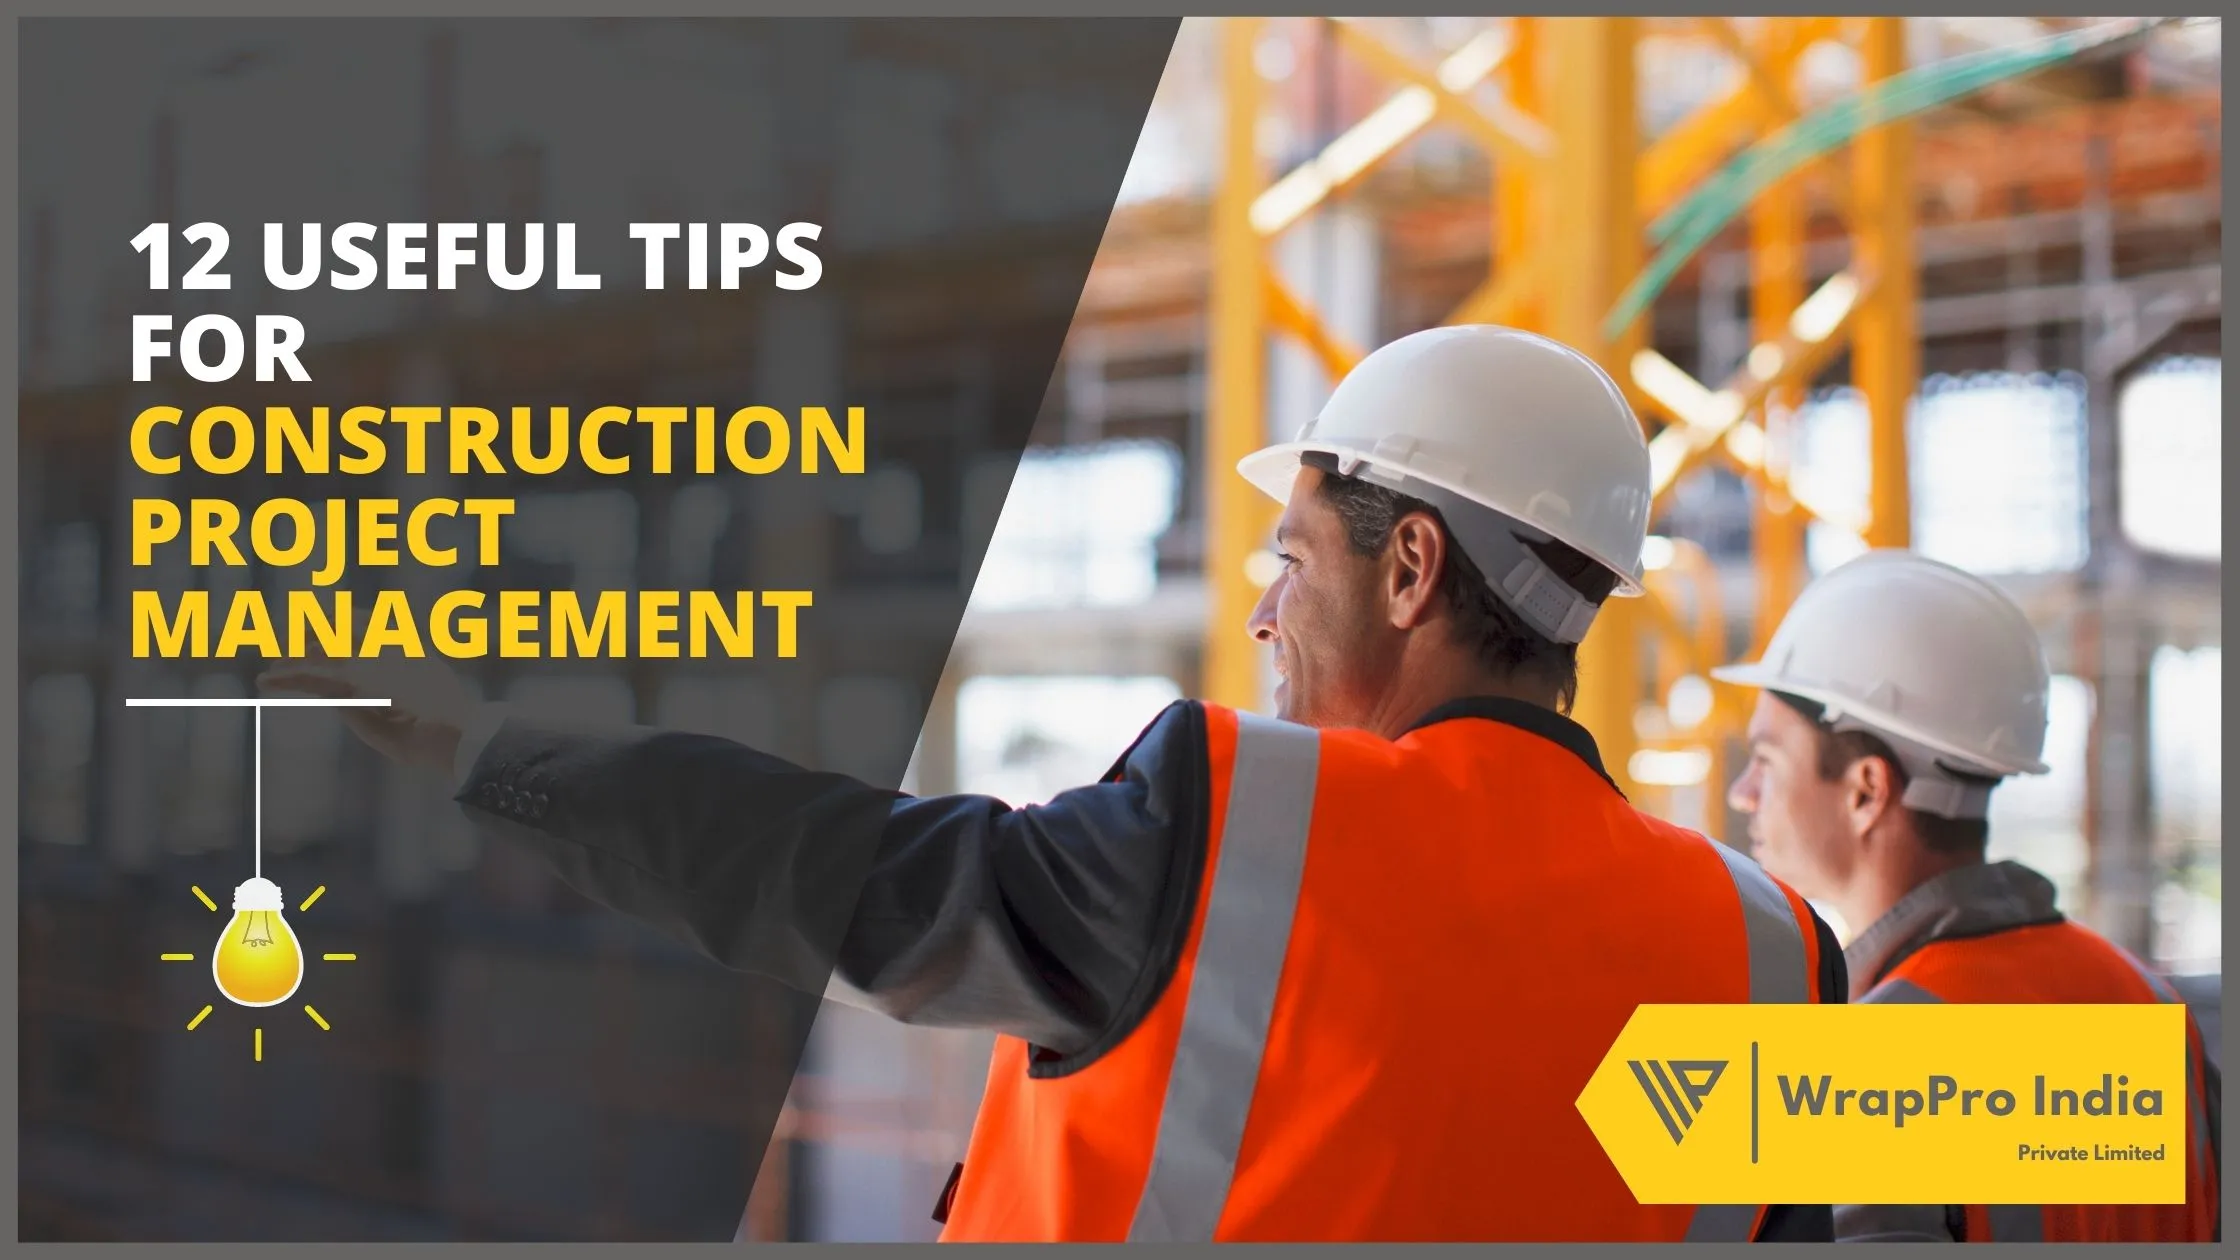 12 Useful Tips for Construction Project Management